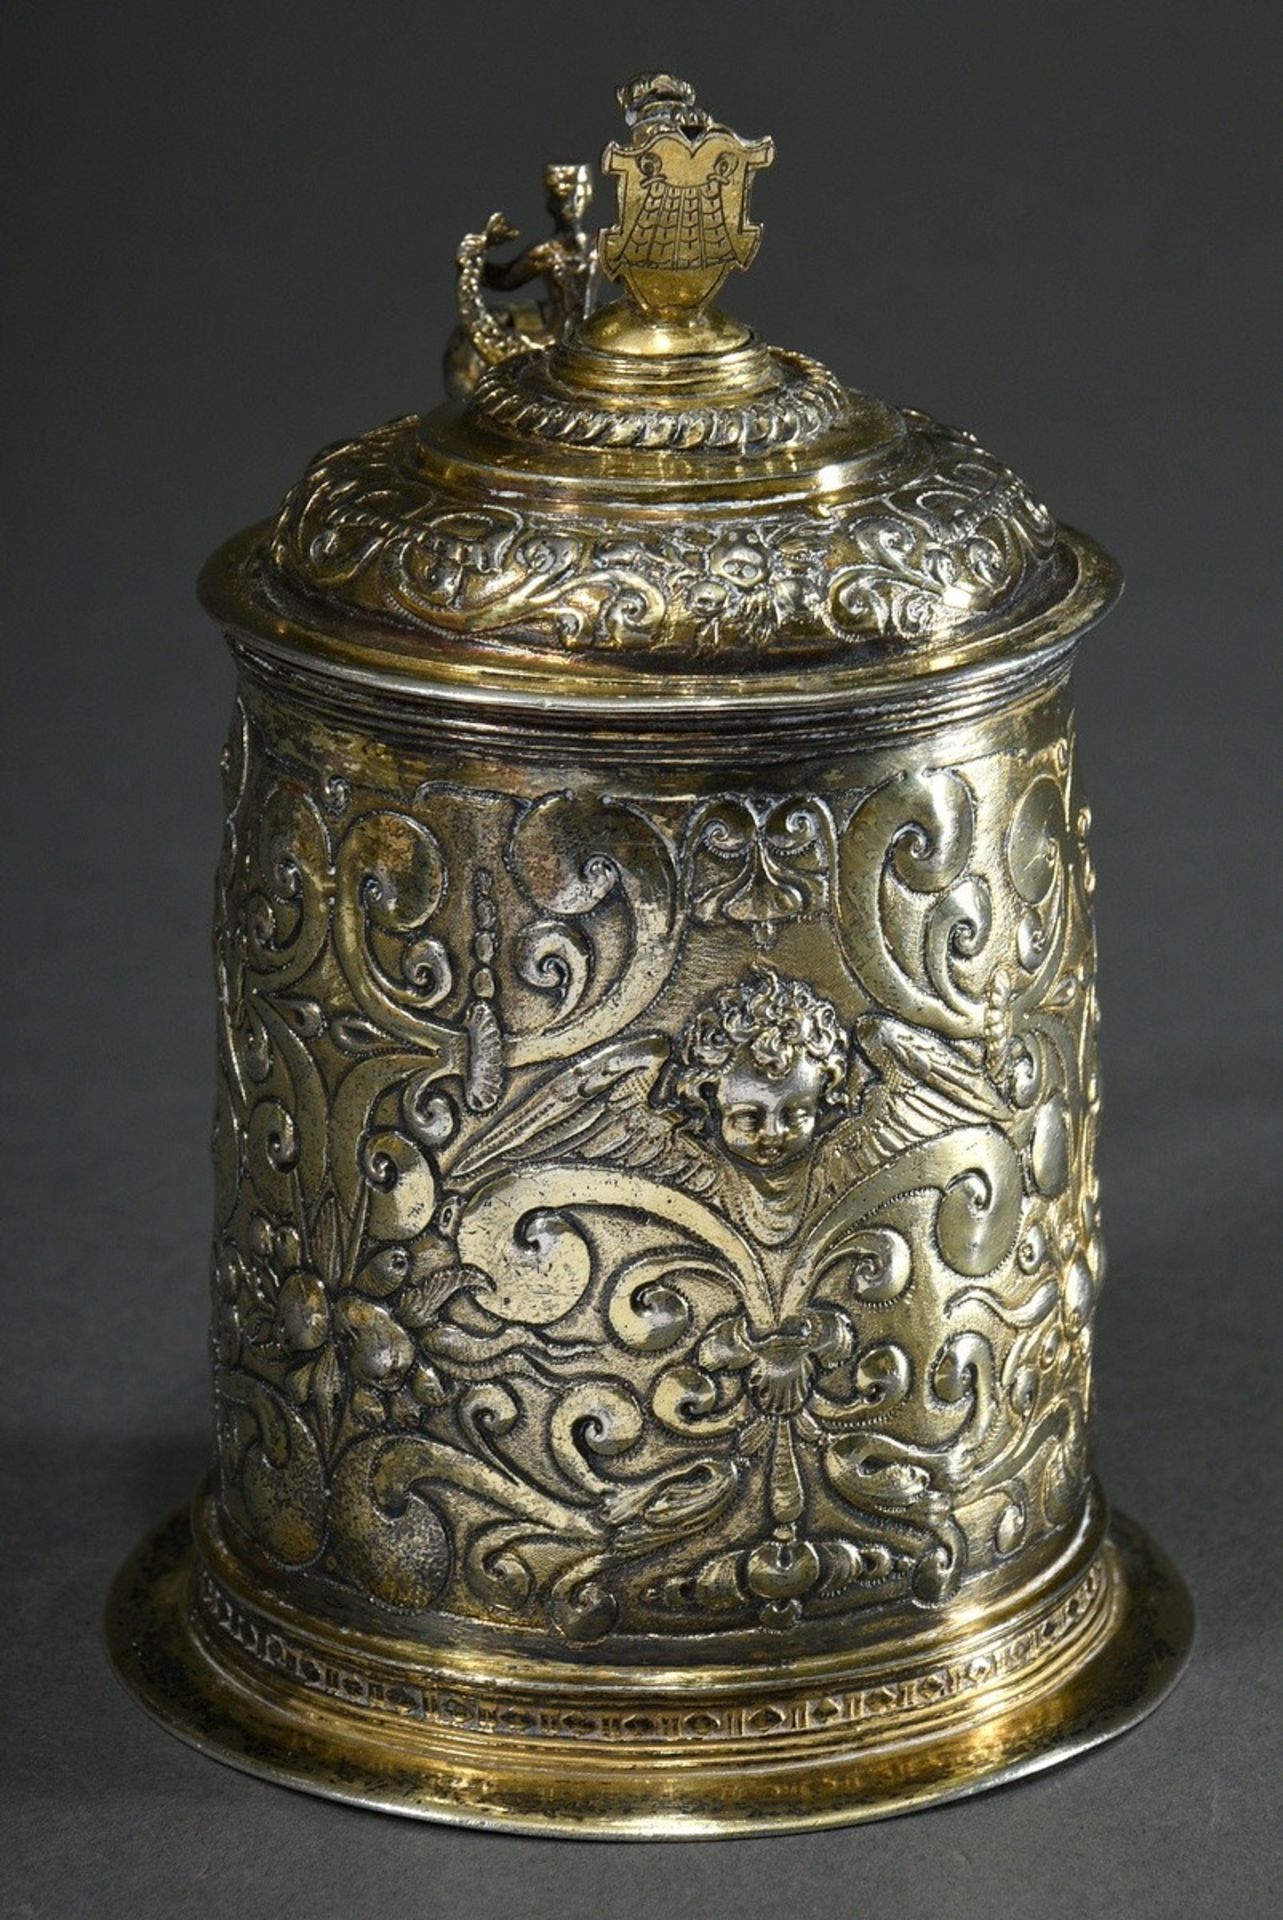 Small Mannerist lidded tankard with "fruit hangings and winged angels' heads" between scrollwork ov - Image 2 of 11